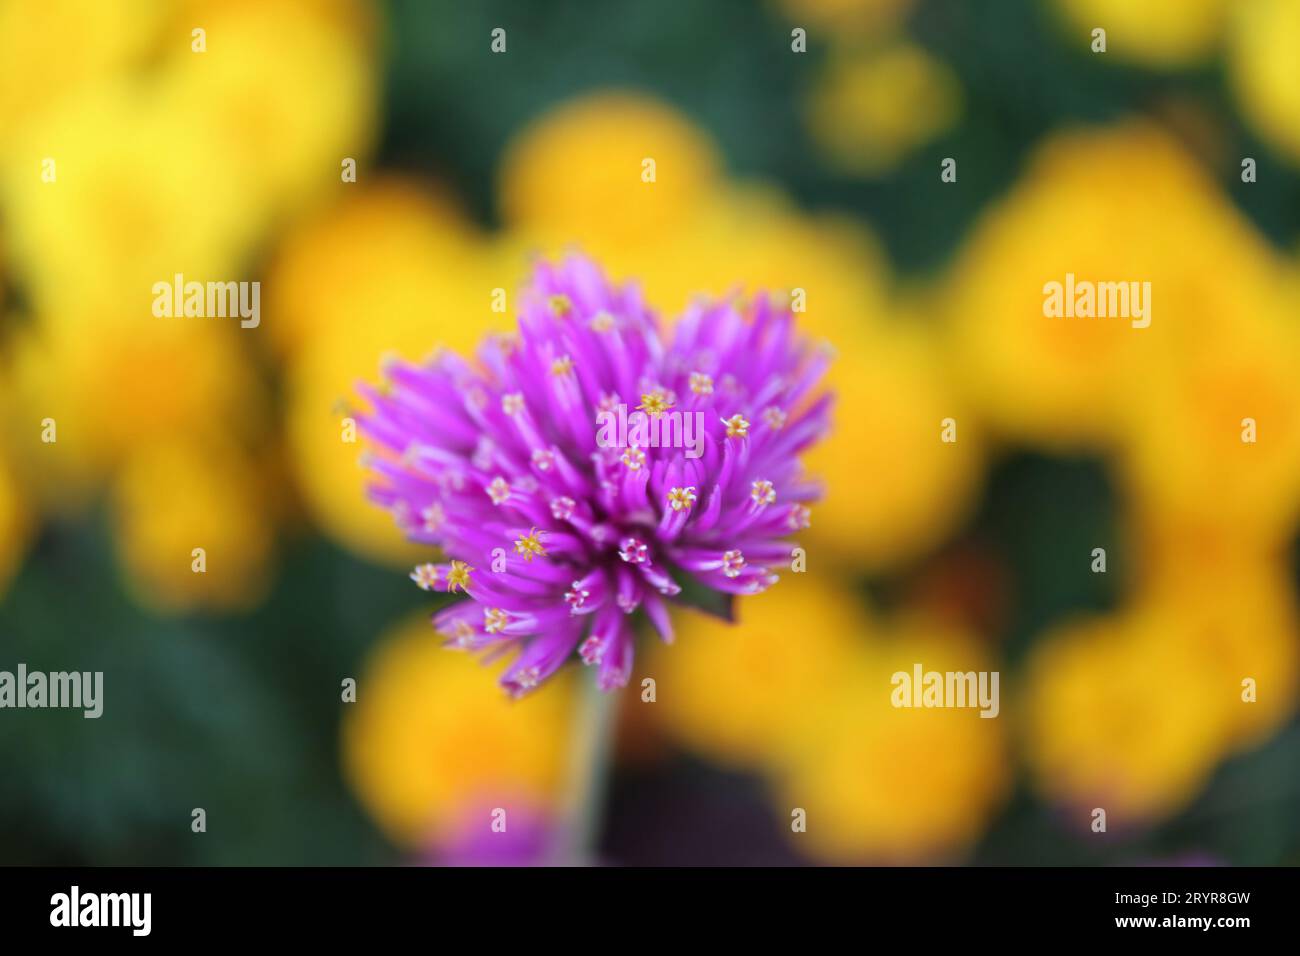 Closeup of Firework Flower or Gomphrena Pulchella with Blurry Marigolds in the Backdrop Stock Photo